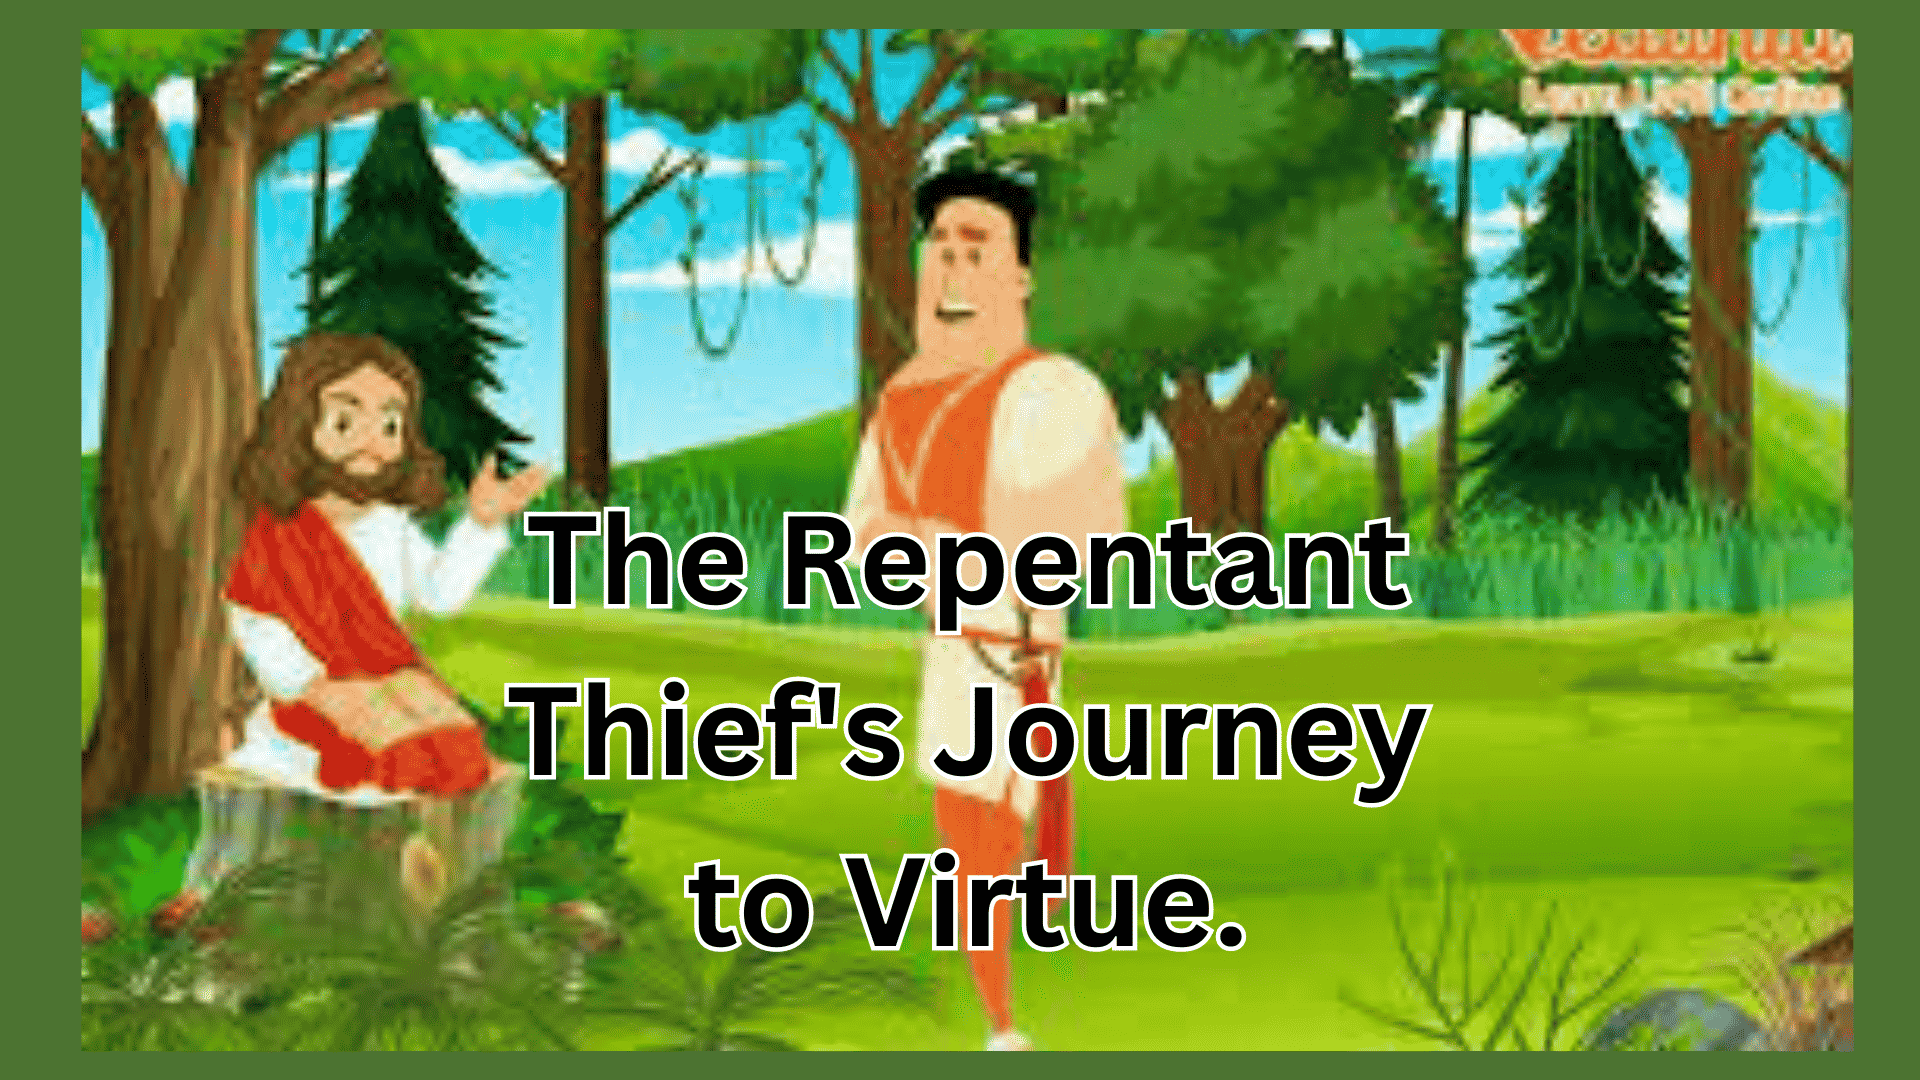 The Repentant Thief's Journey to Virtue.